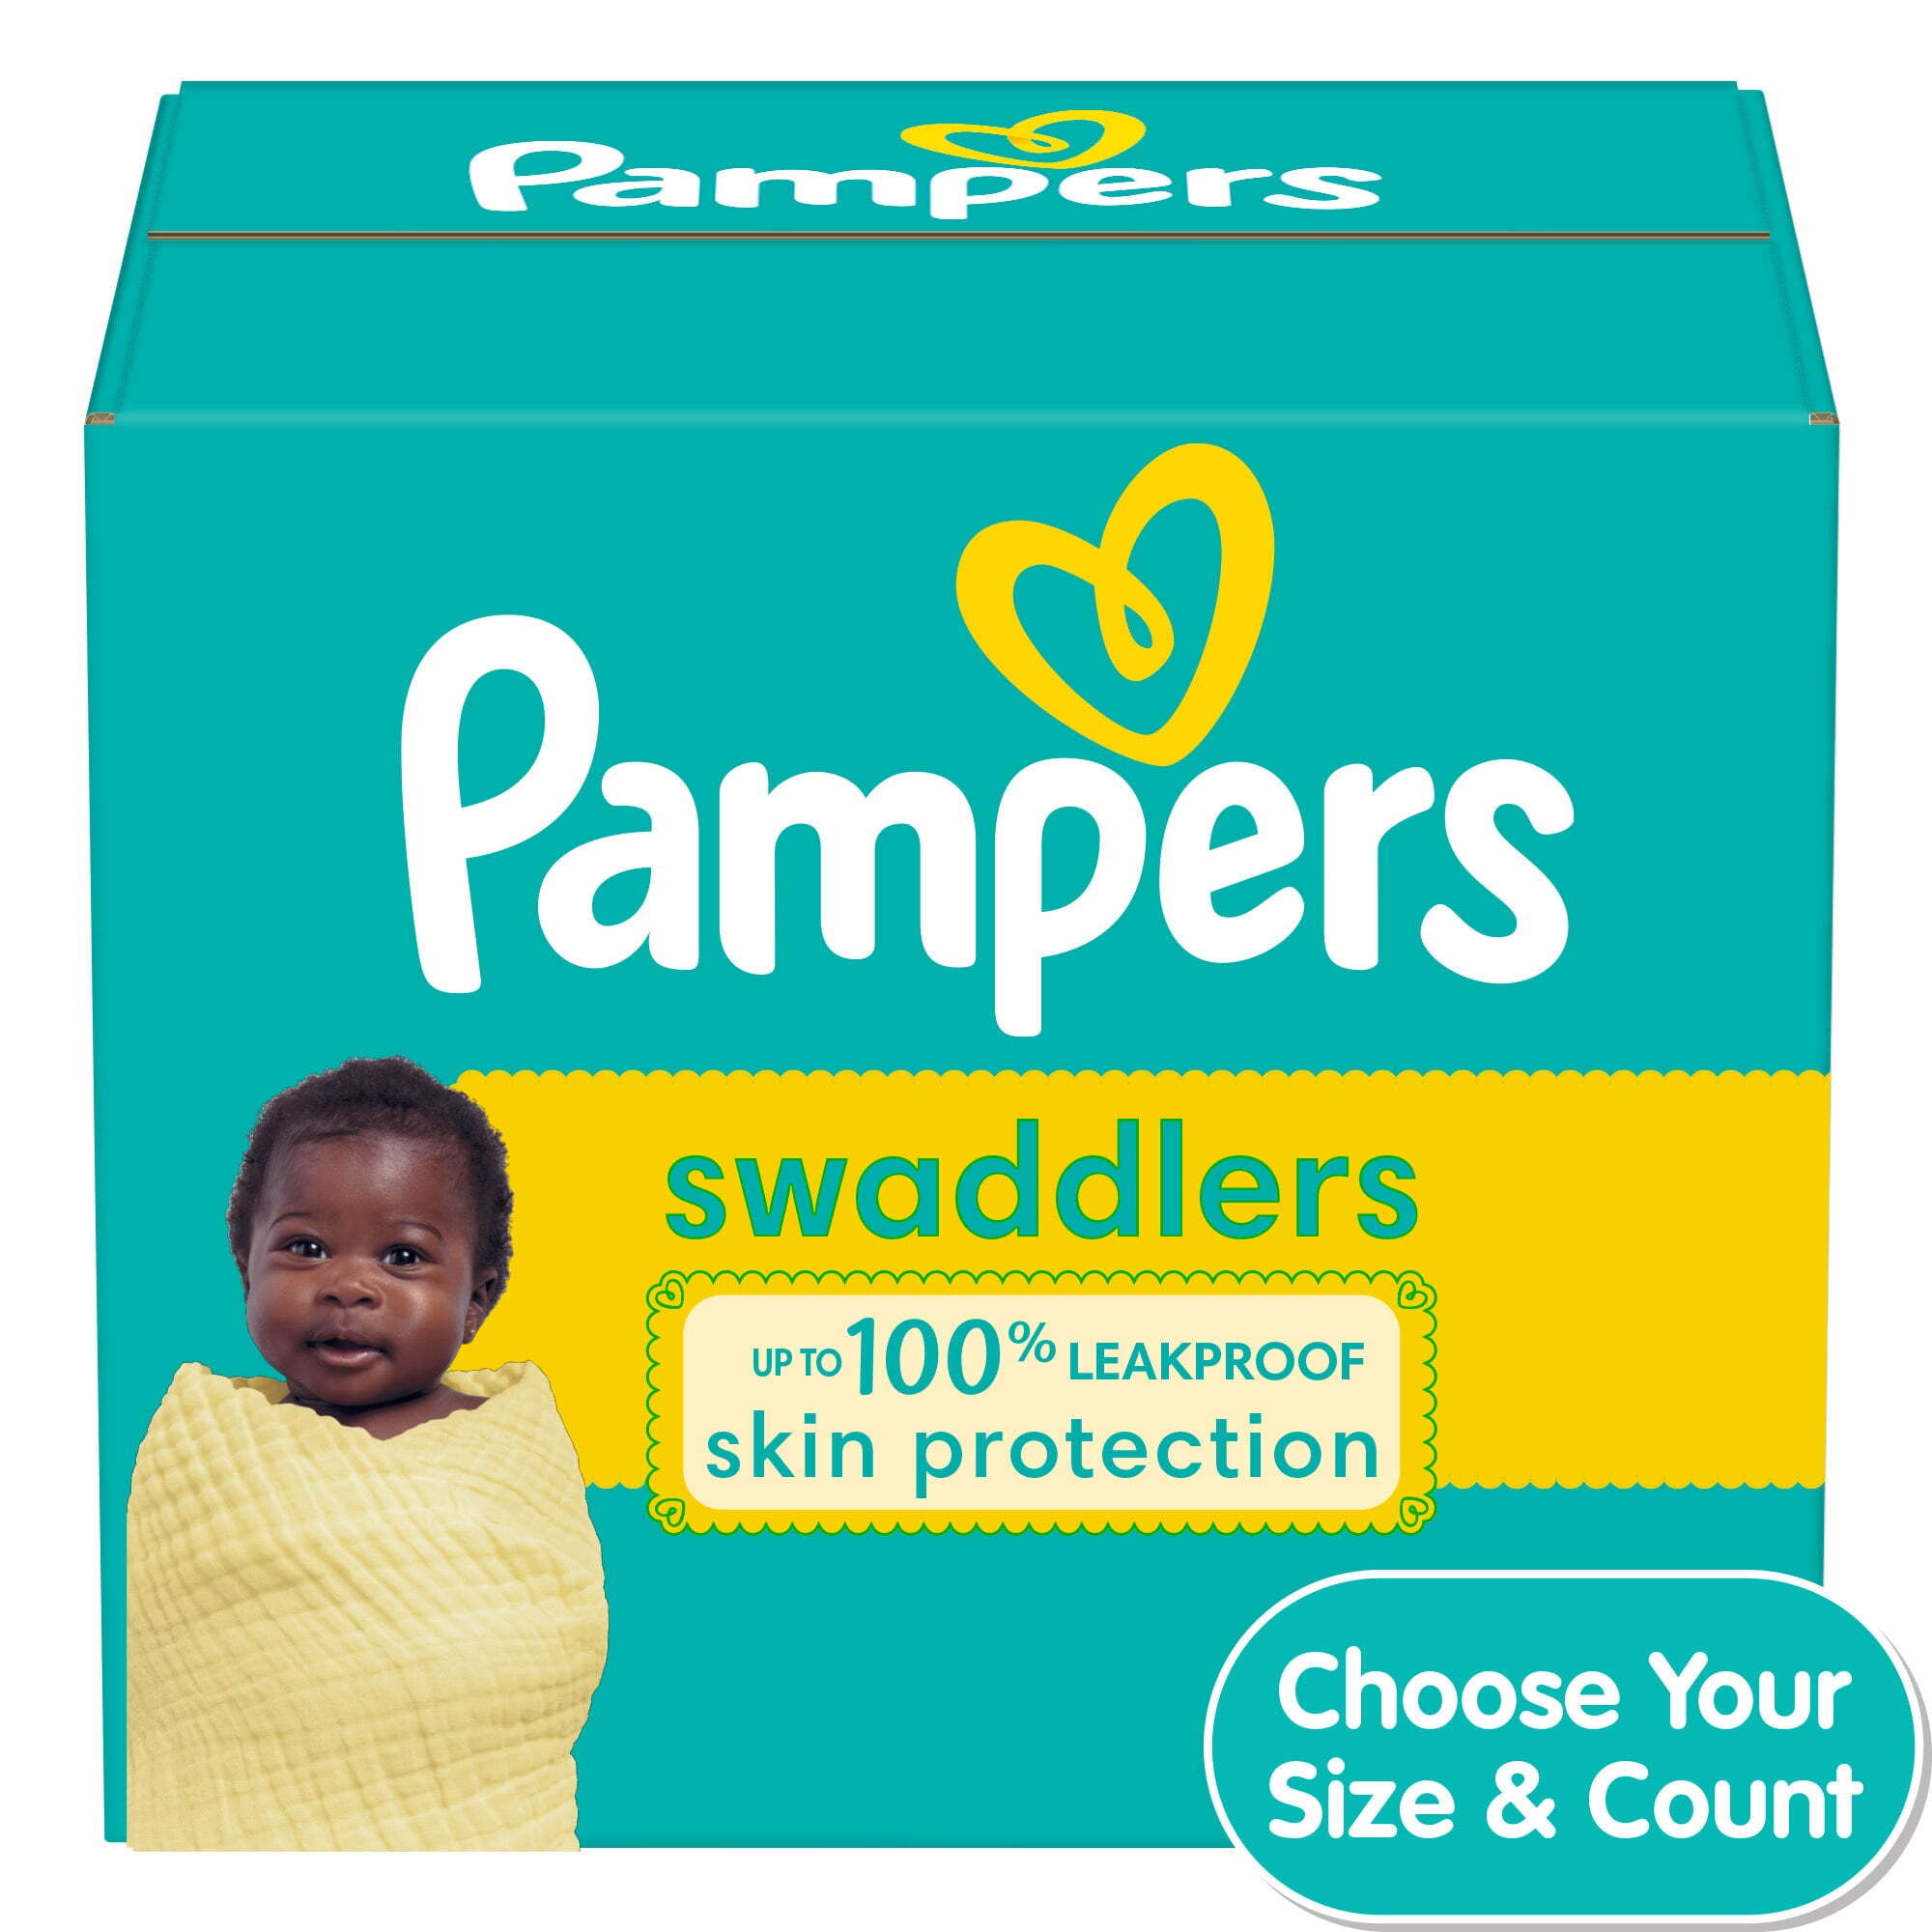 Pampers Swaddlers Diapers Size 4, 66 Count (Choose Your Size & Count)